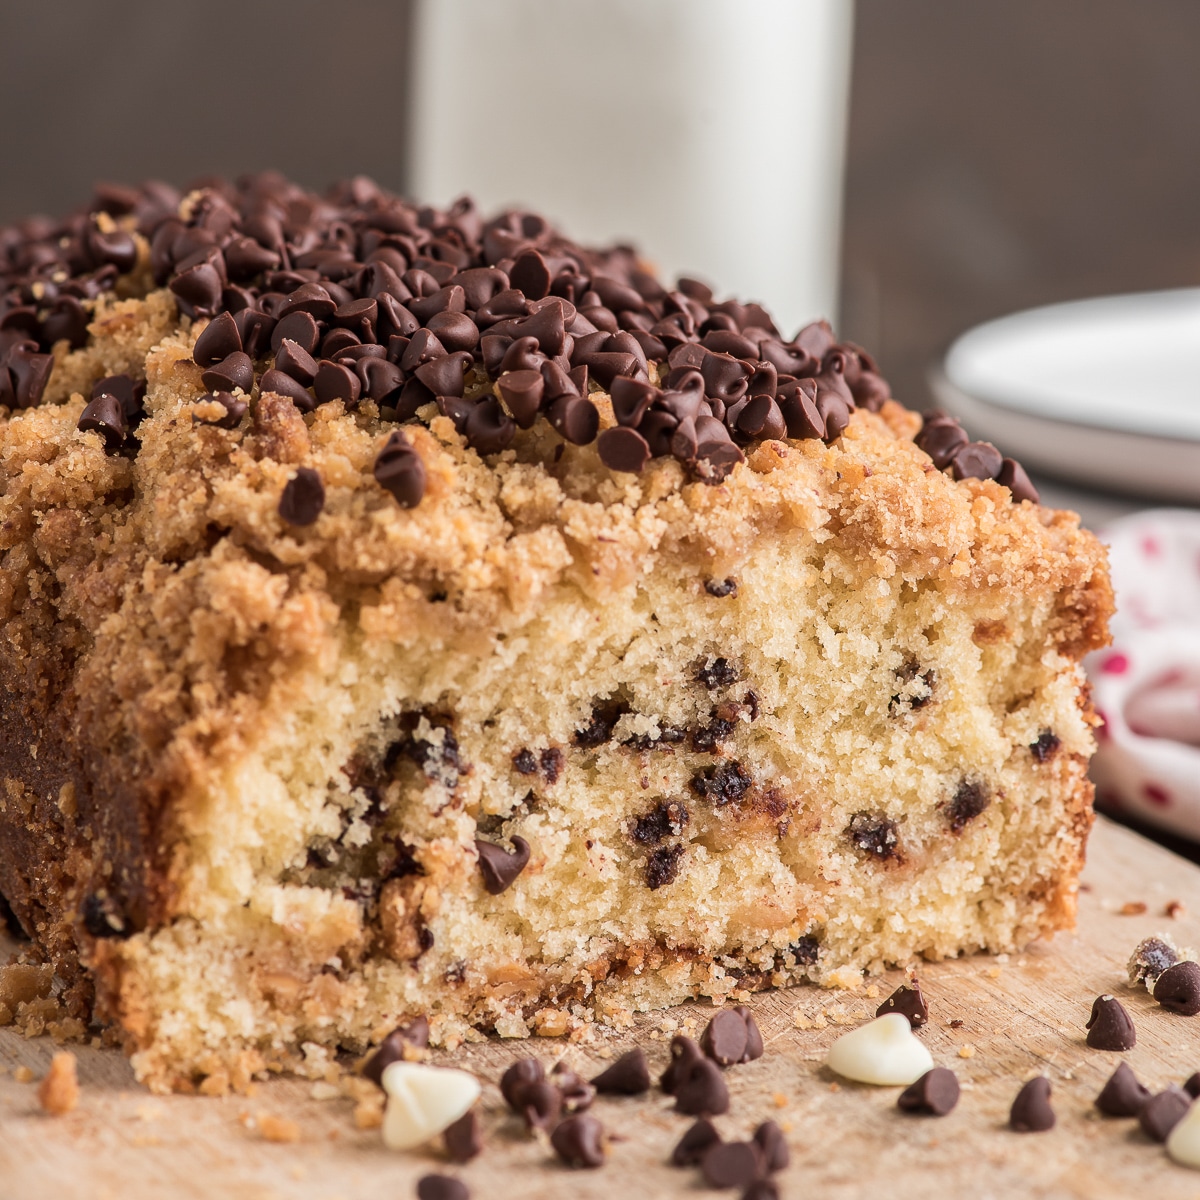 Sour Cream Chocolate Crumb Cake — The Sweet & Sour Baker